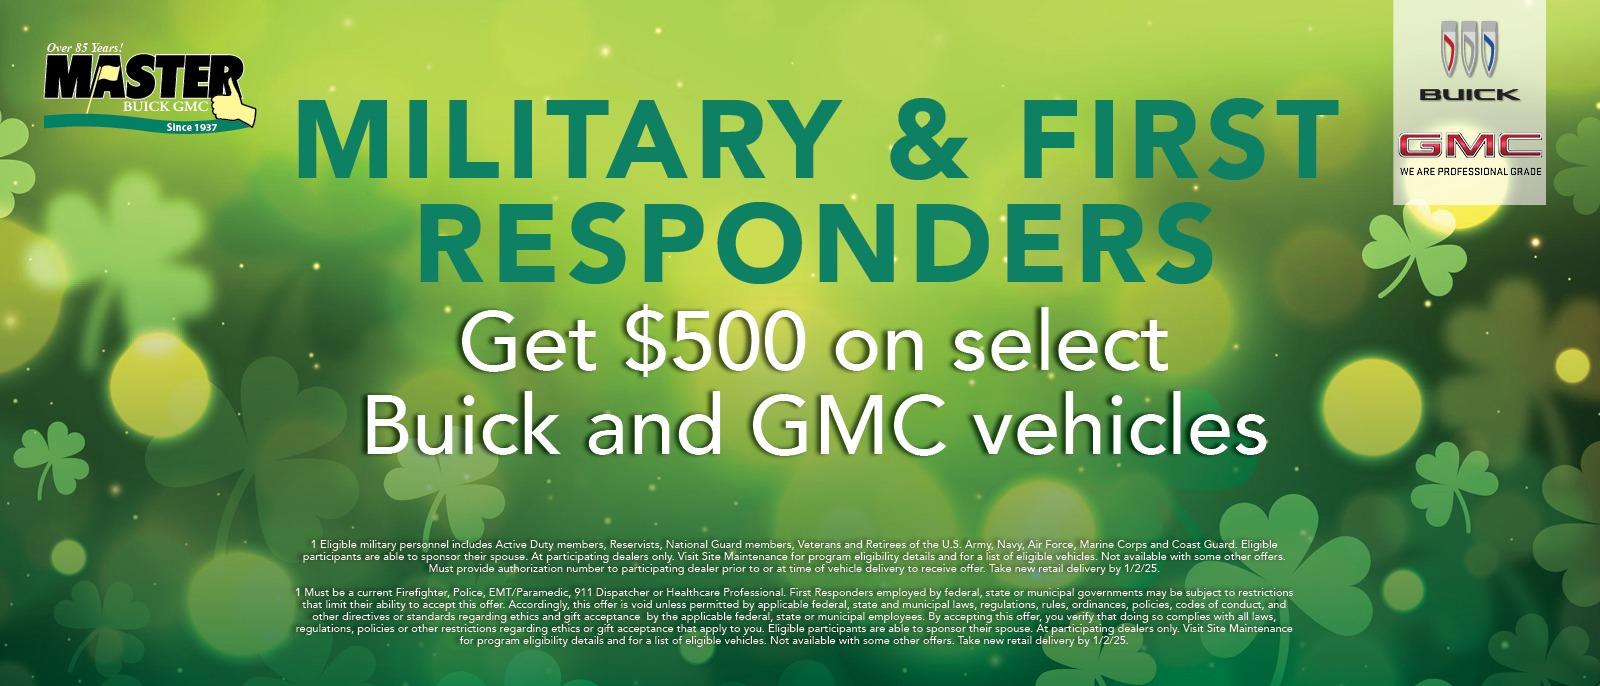 MILITARY & FIRST RESPONDERS